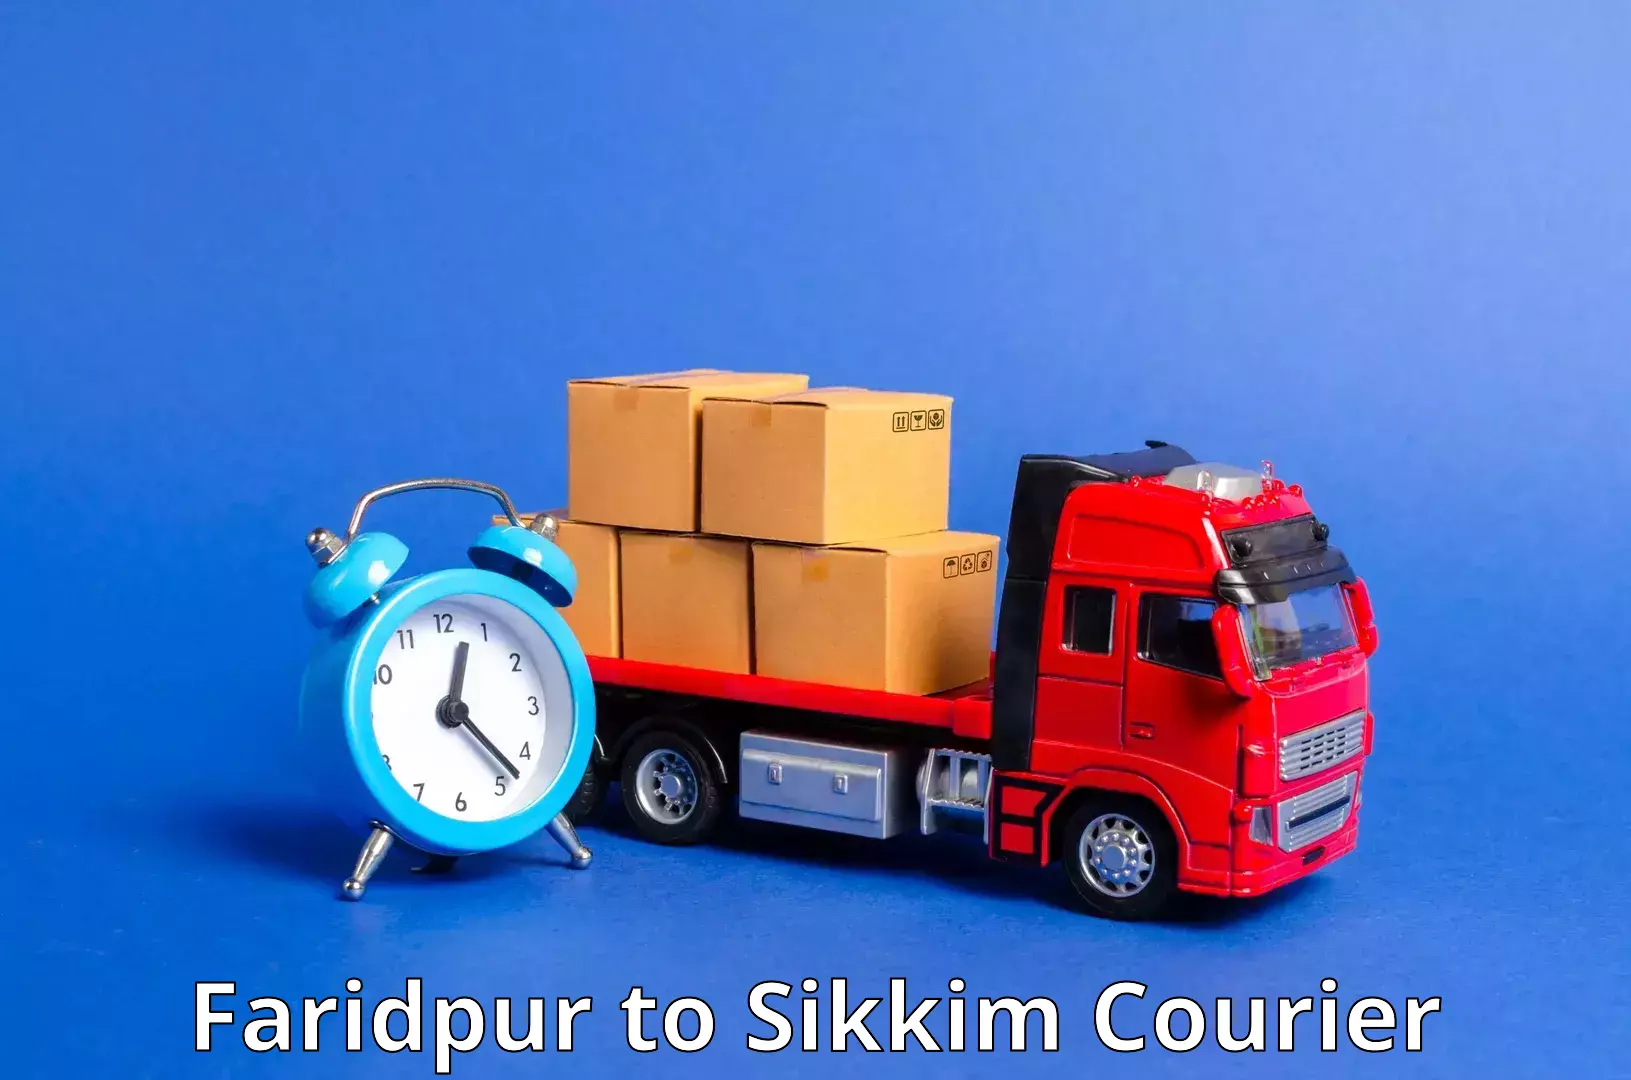 Package delivery network Faridpur to Sikkim